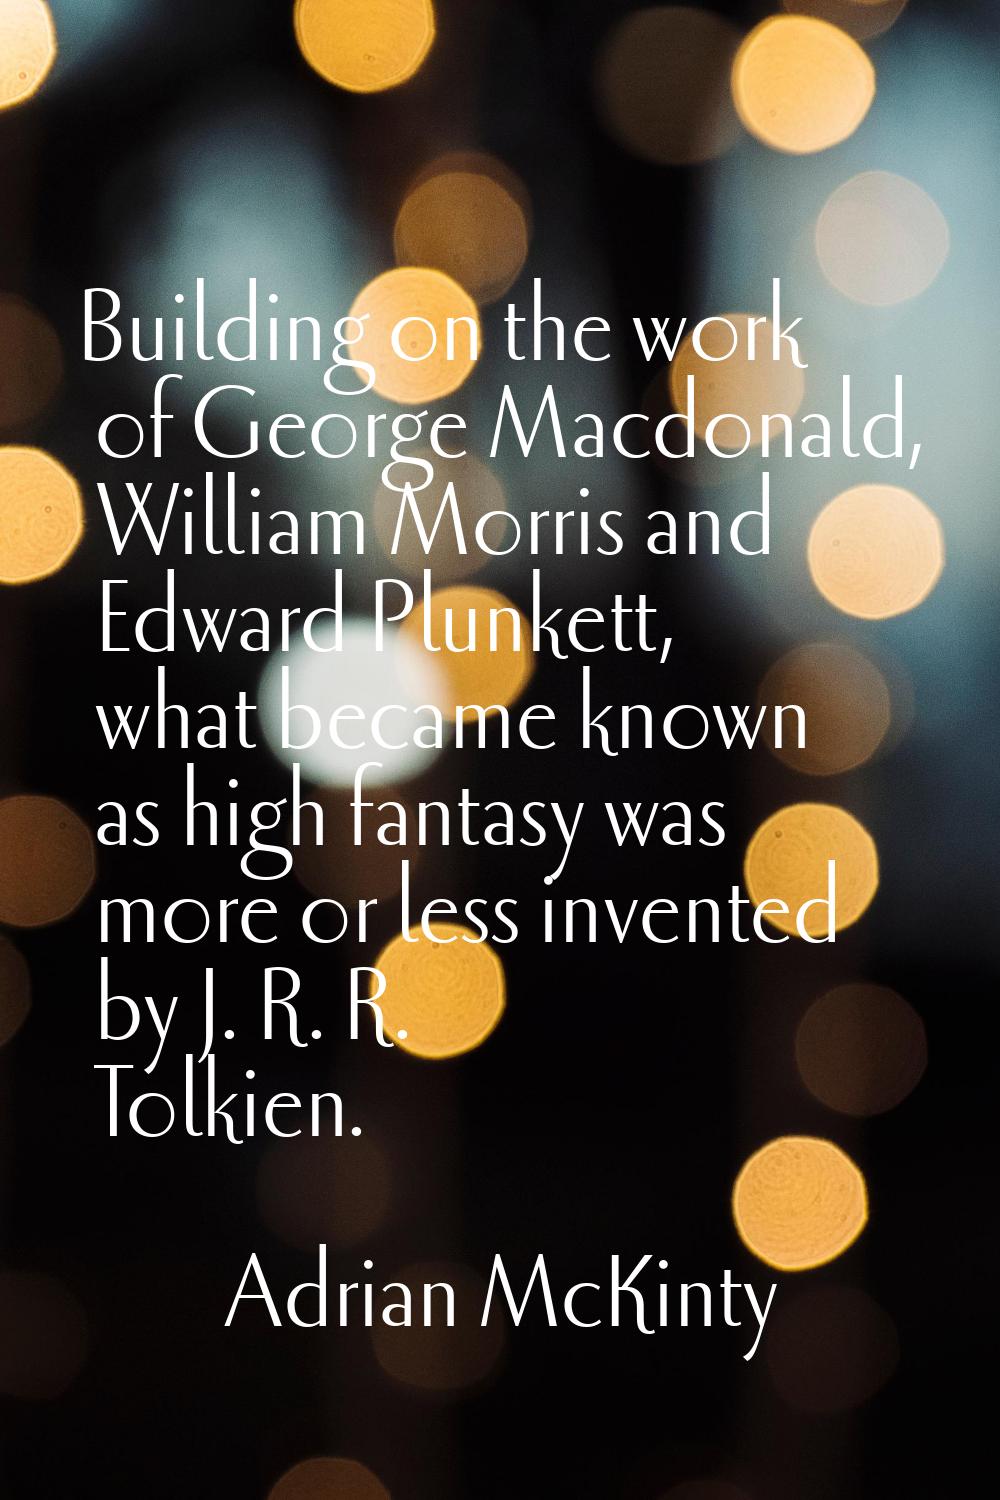 Building on the work of George Macdonald, William Morris and Edward Plunkett, what became known as 